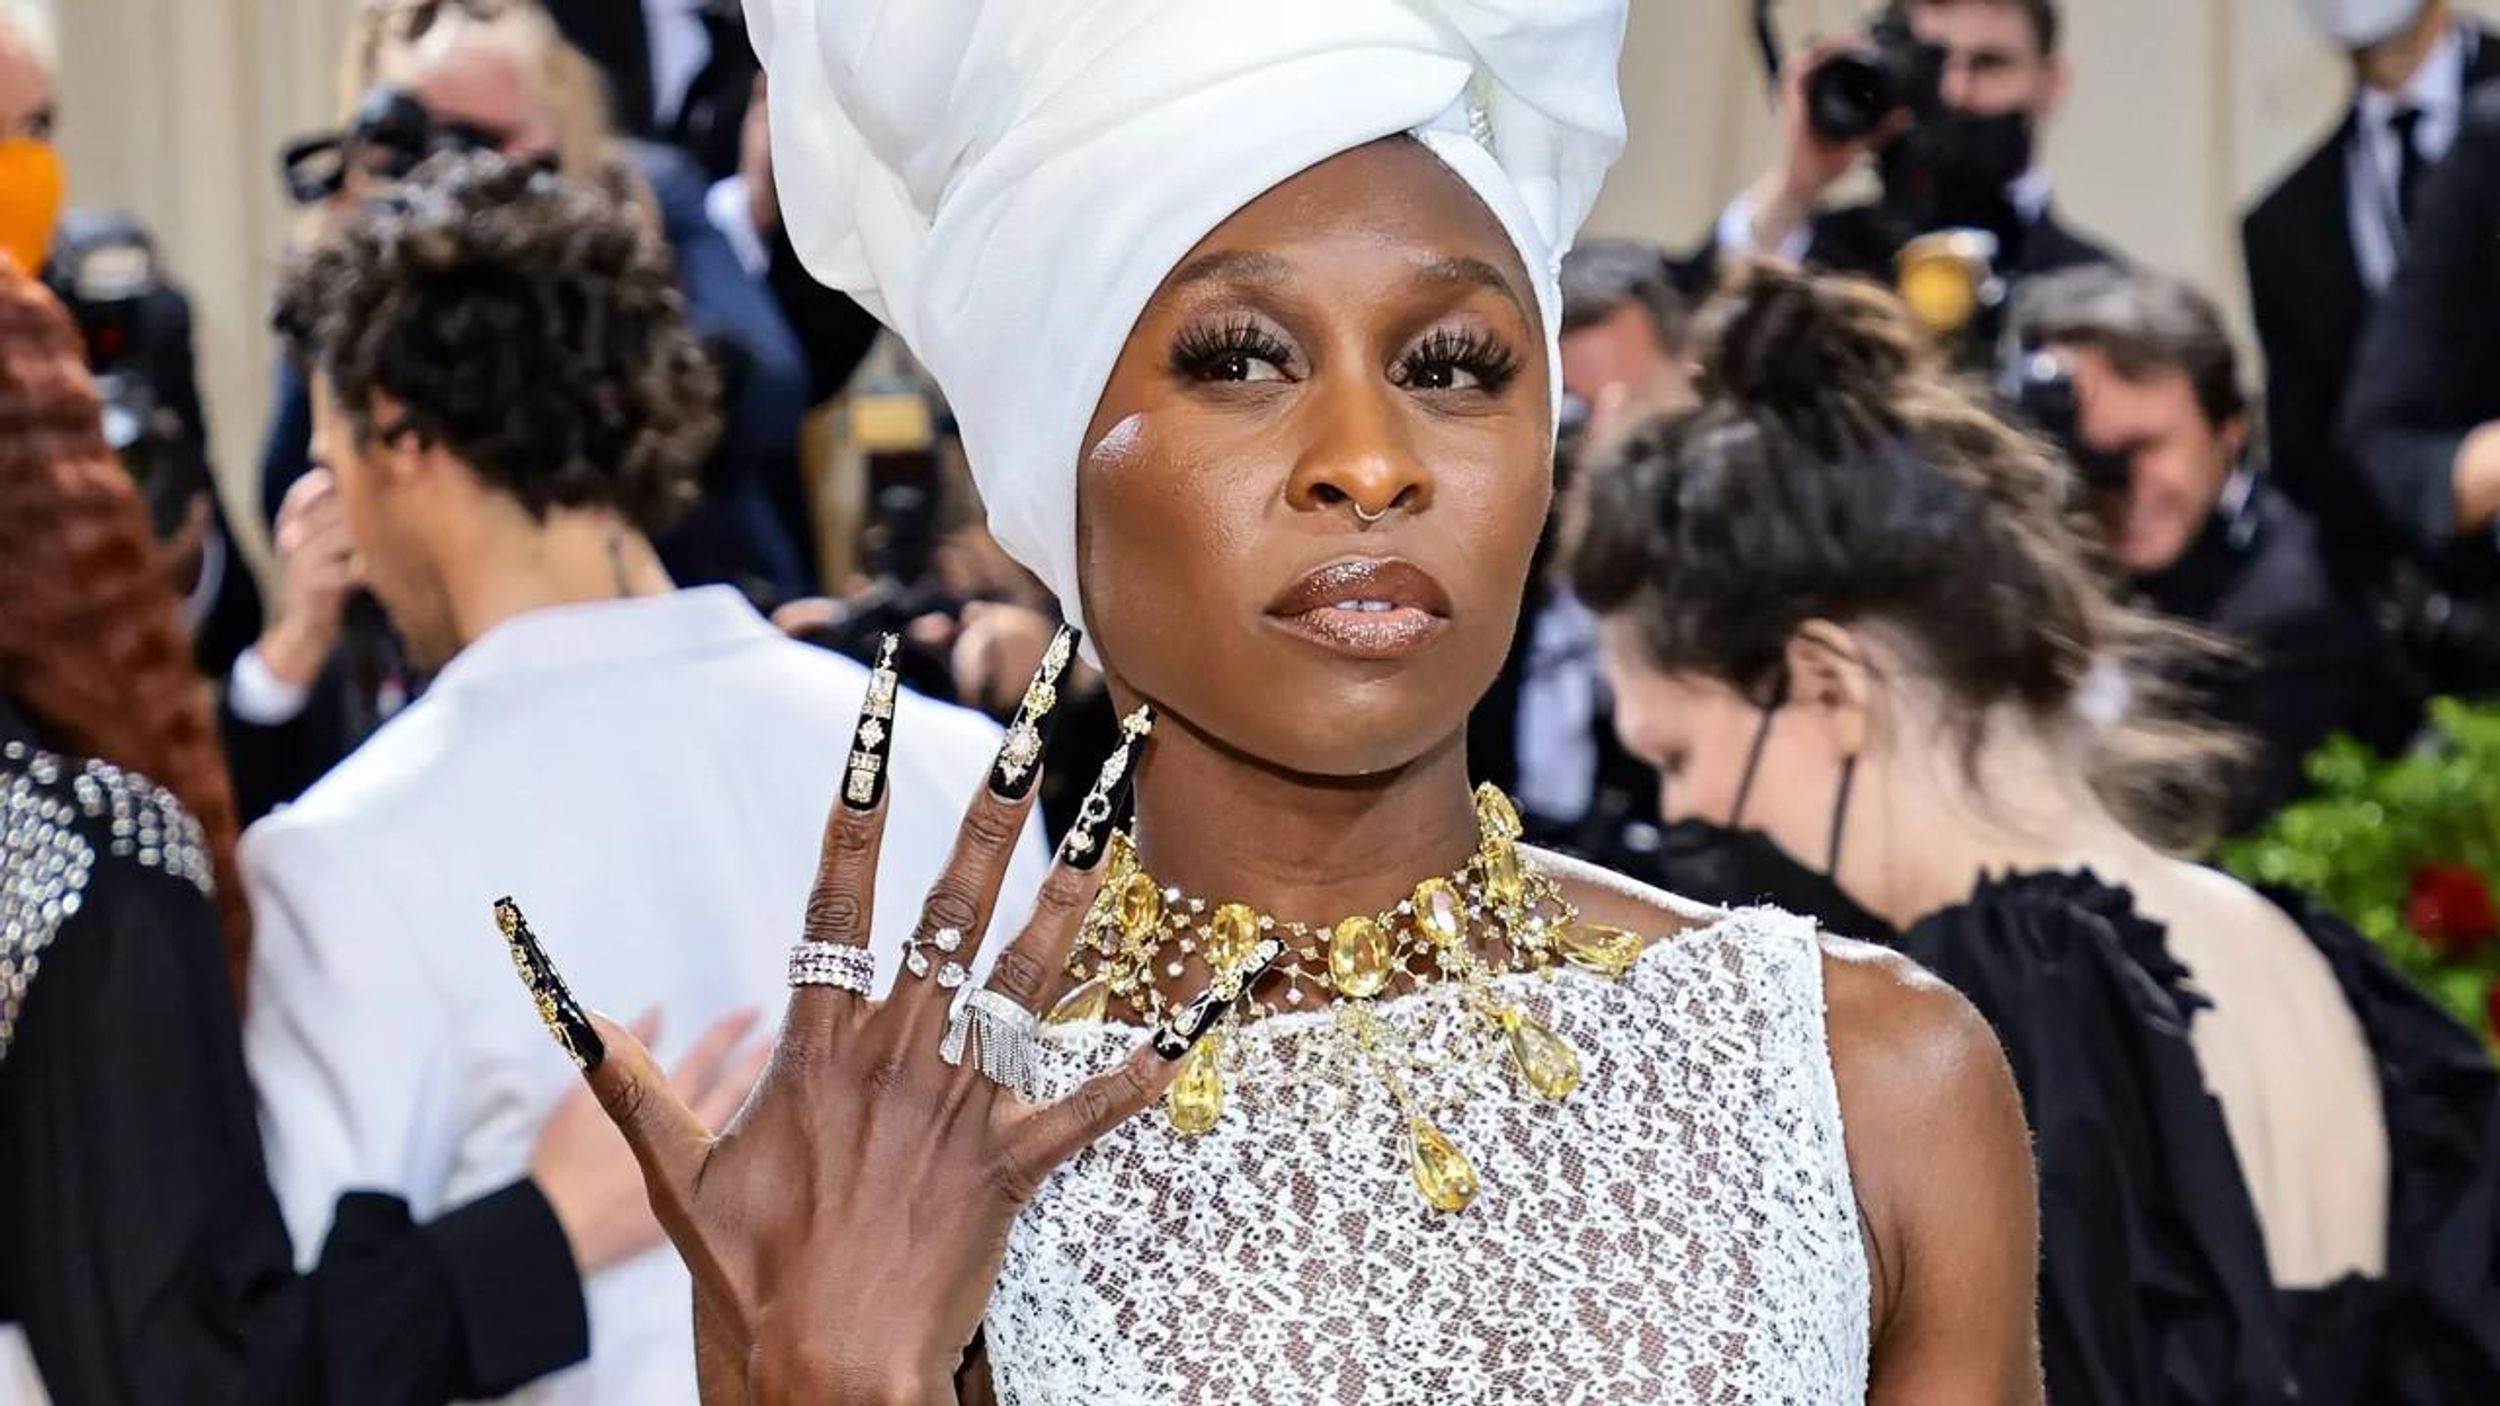 Nail Art Reigned on the Met Gala 2022 Red Carpet